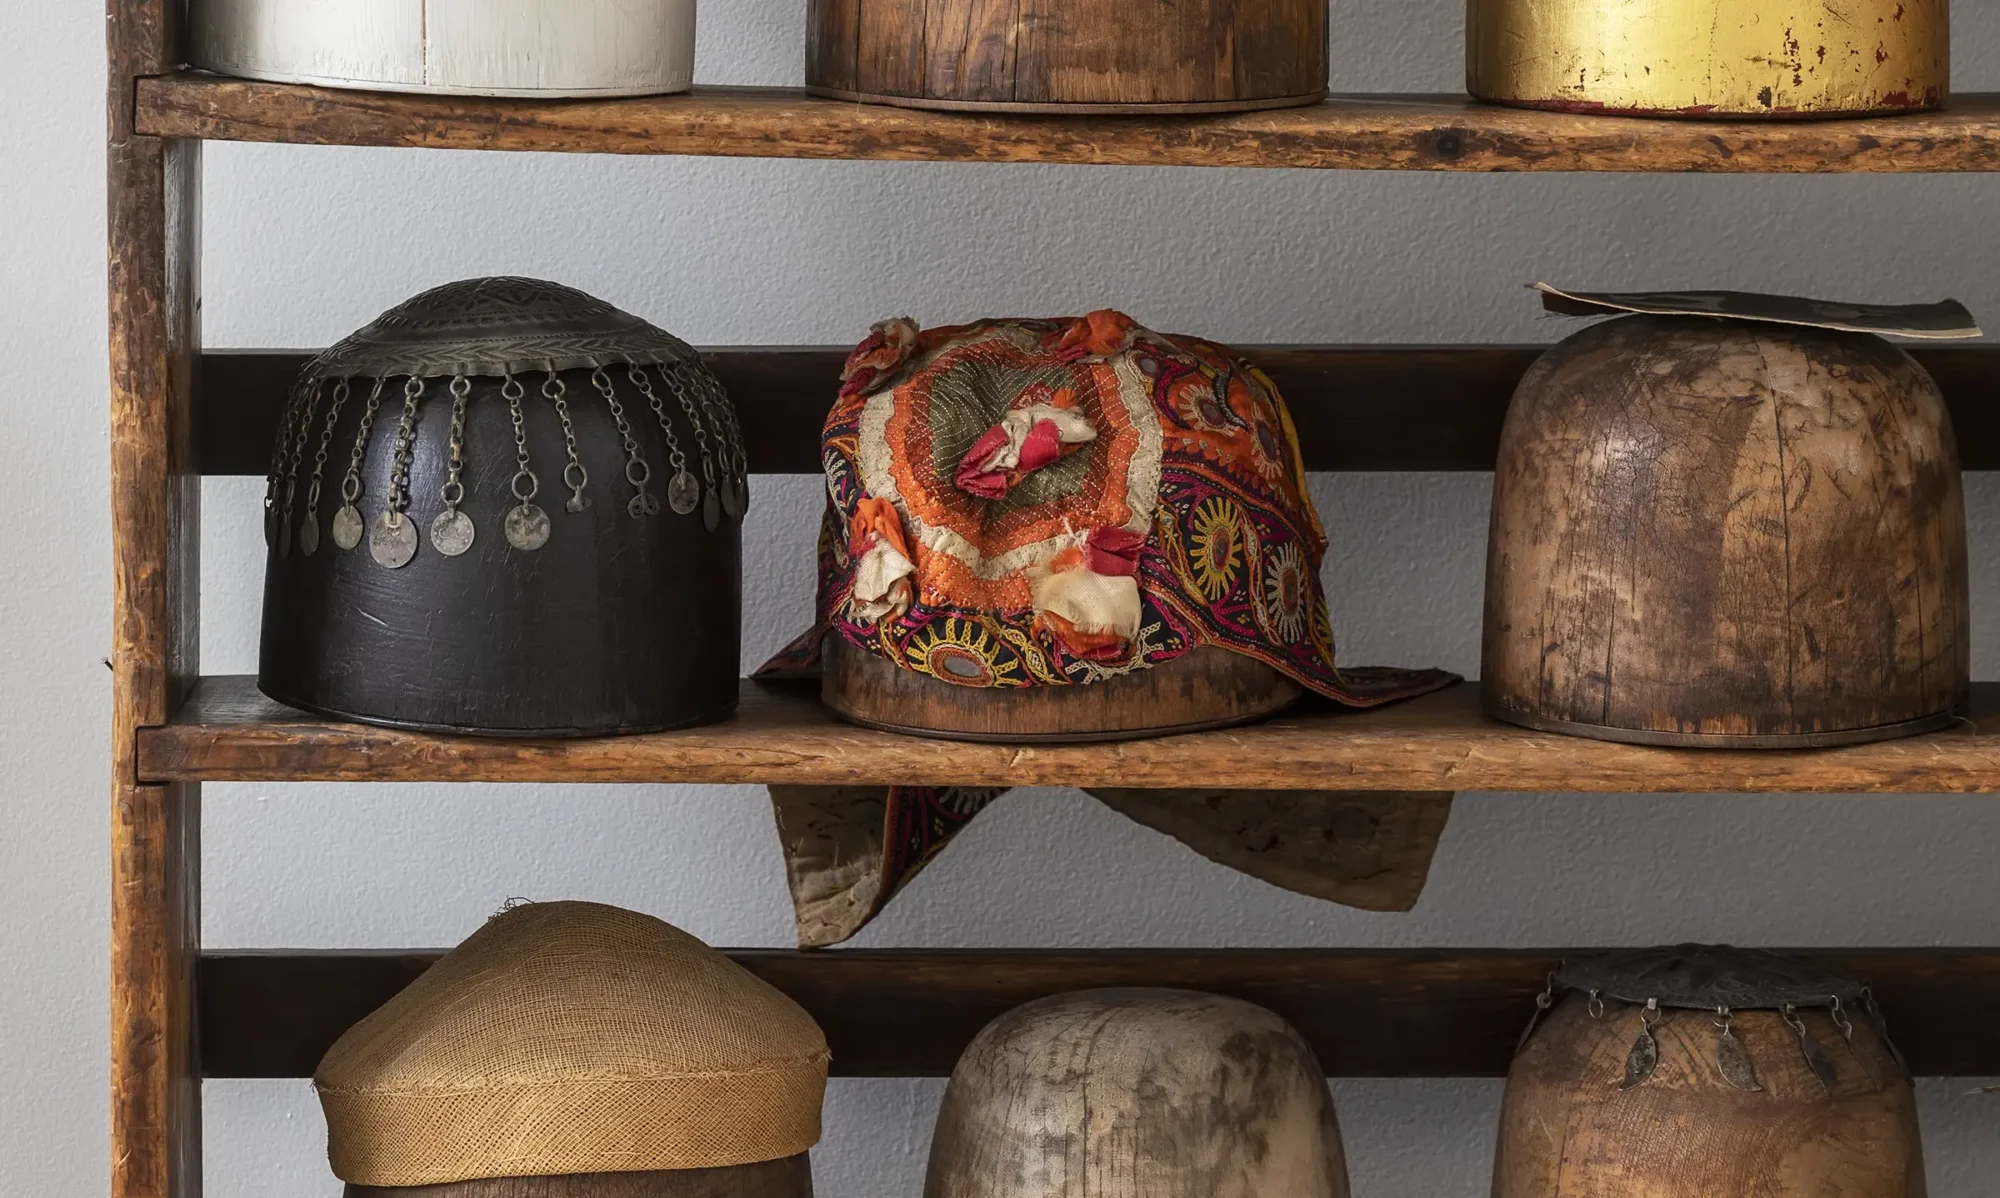 Shelf of head forms for different hats and headwear.